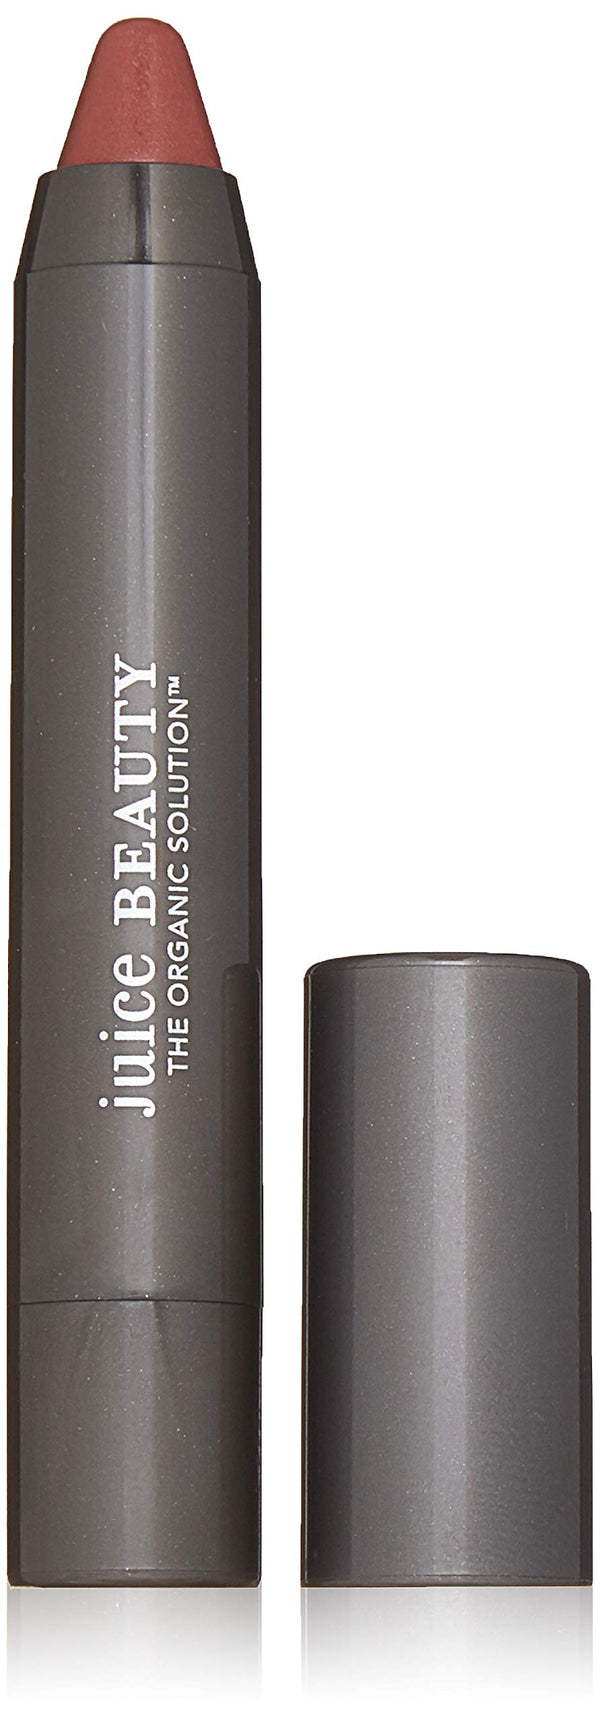 Juice Beauty Phyto-Pigments Luminous Lip Crayon, for Luxury Beauty with Crushed Roses